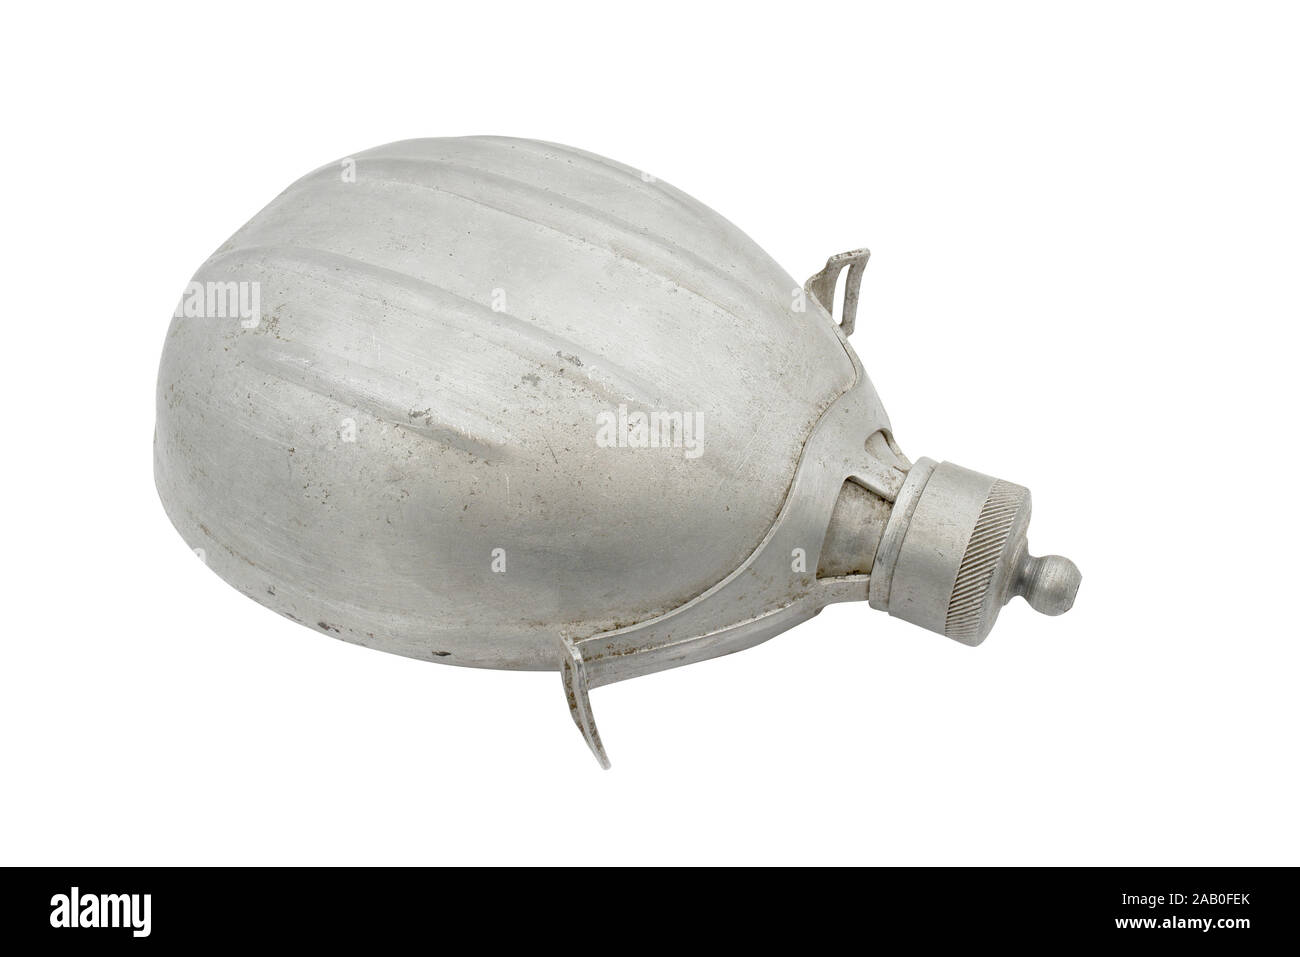 Czech army field flask (canteen). 1950-60. Path on white background Stock Photo